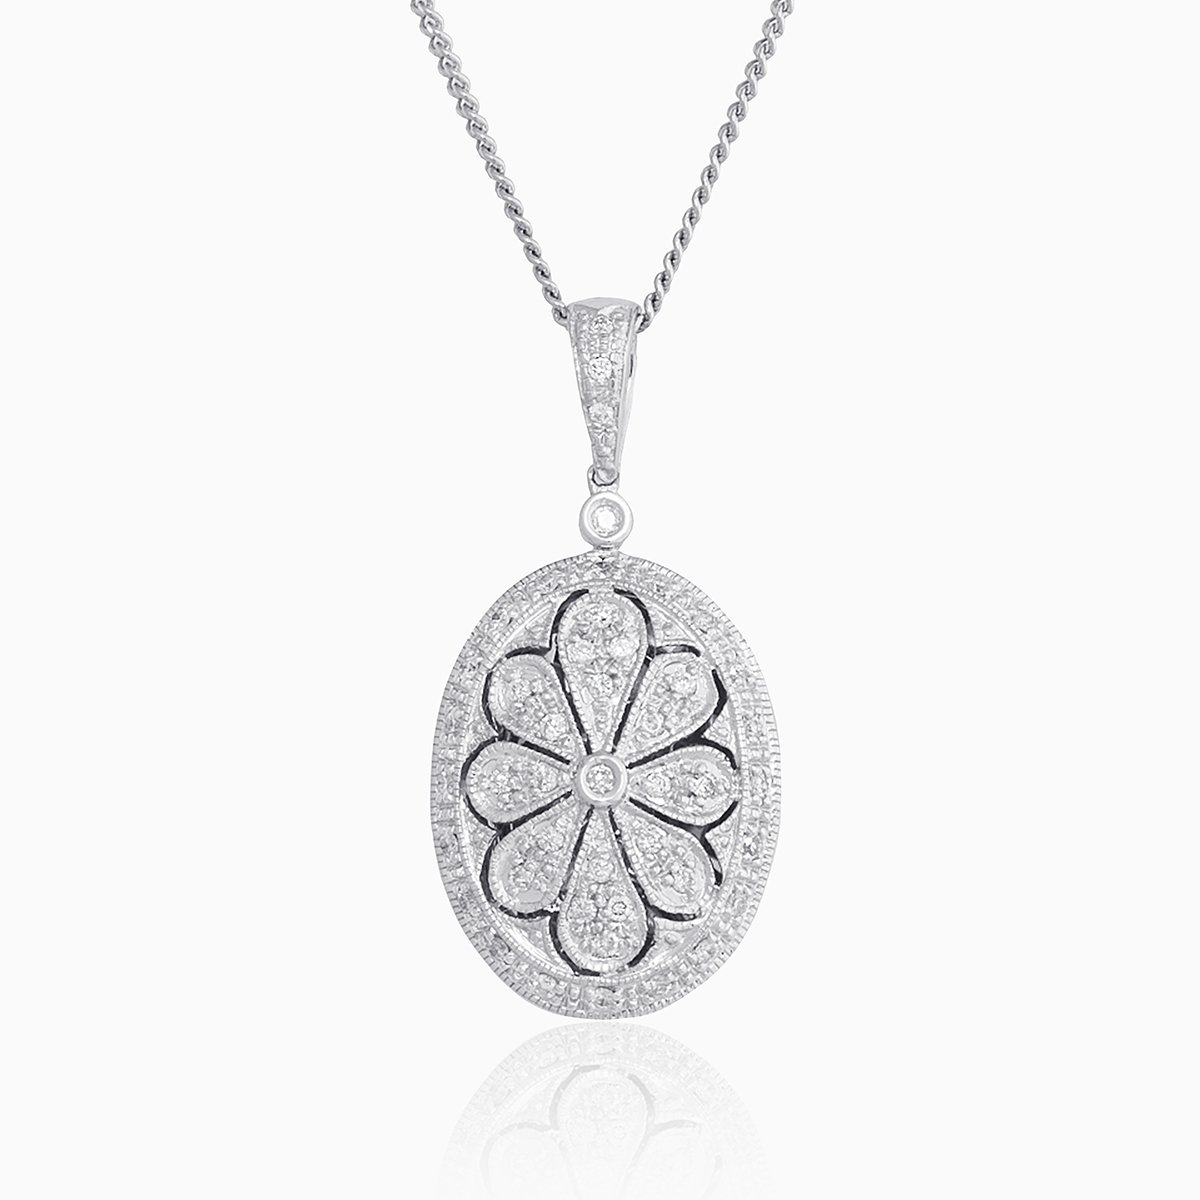 9 ct white gold oval locket pave set with diamonds in a floral design on a 9 ct white gold curb chain